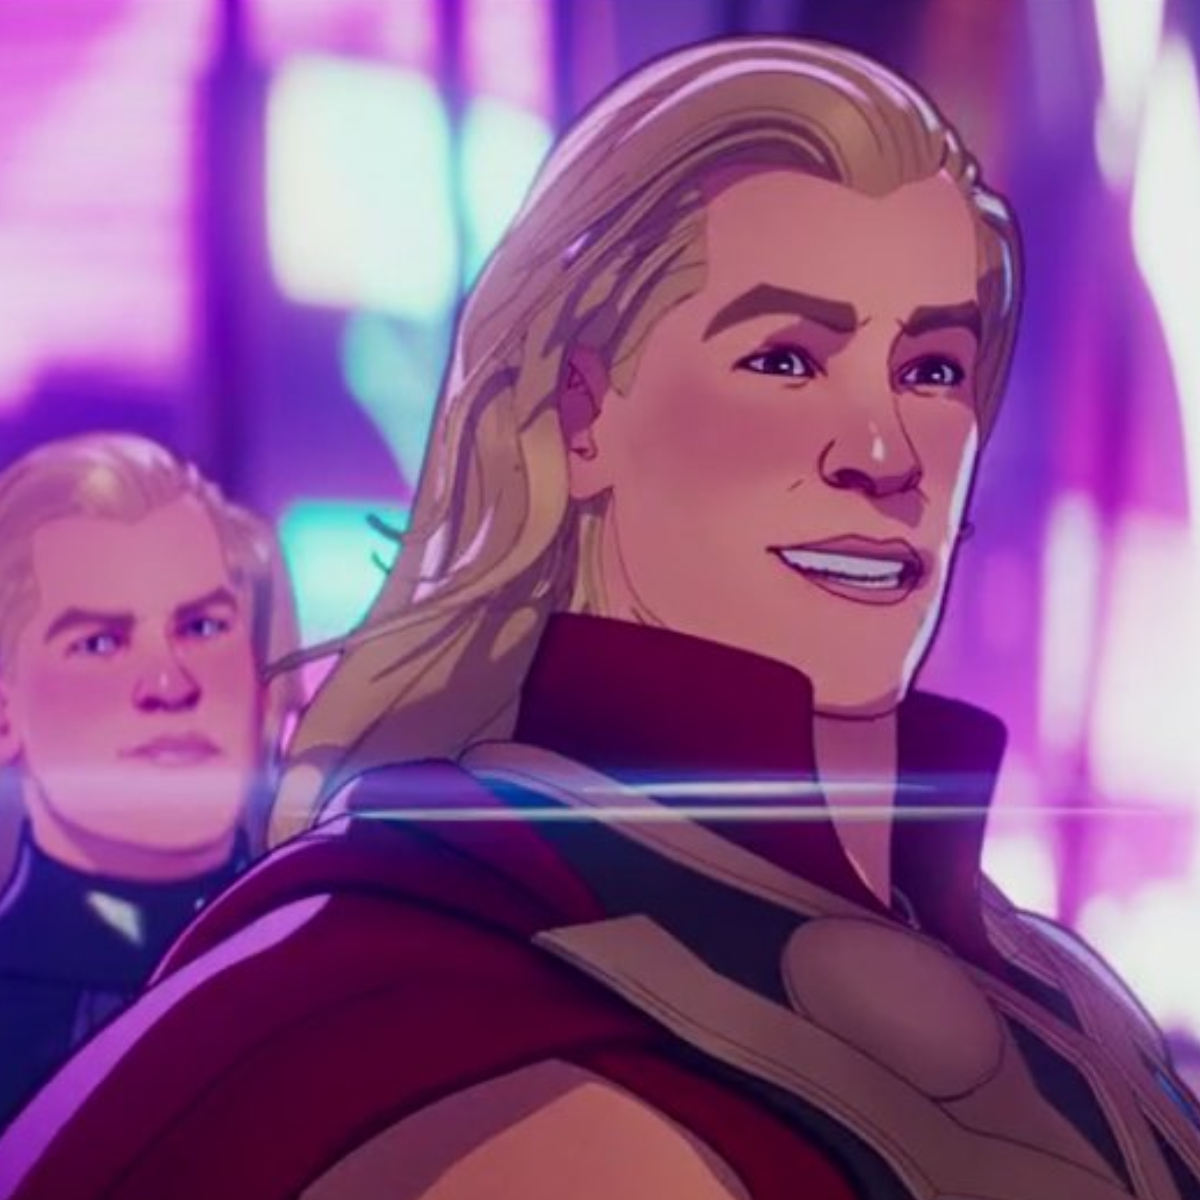 What If...? Episode 7 shows us a different side of Thor